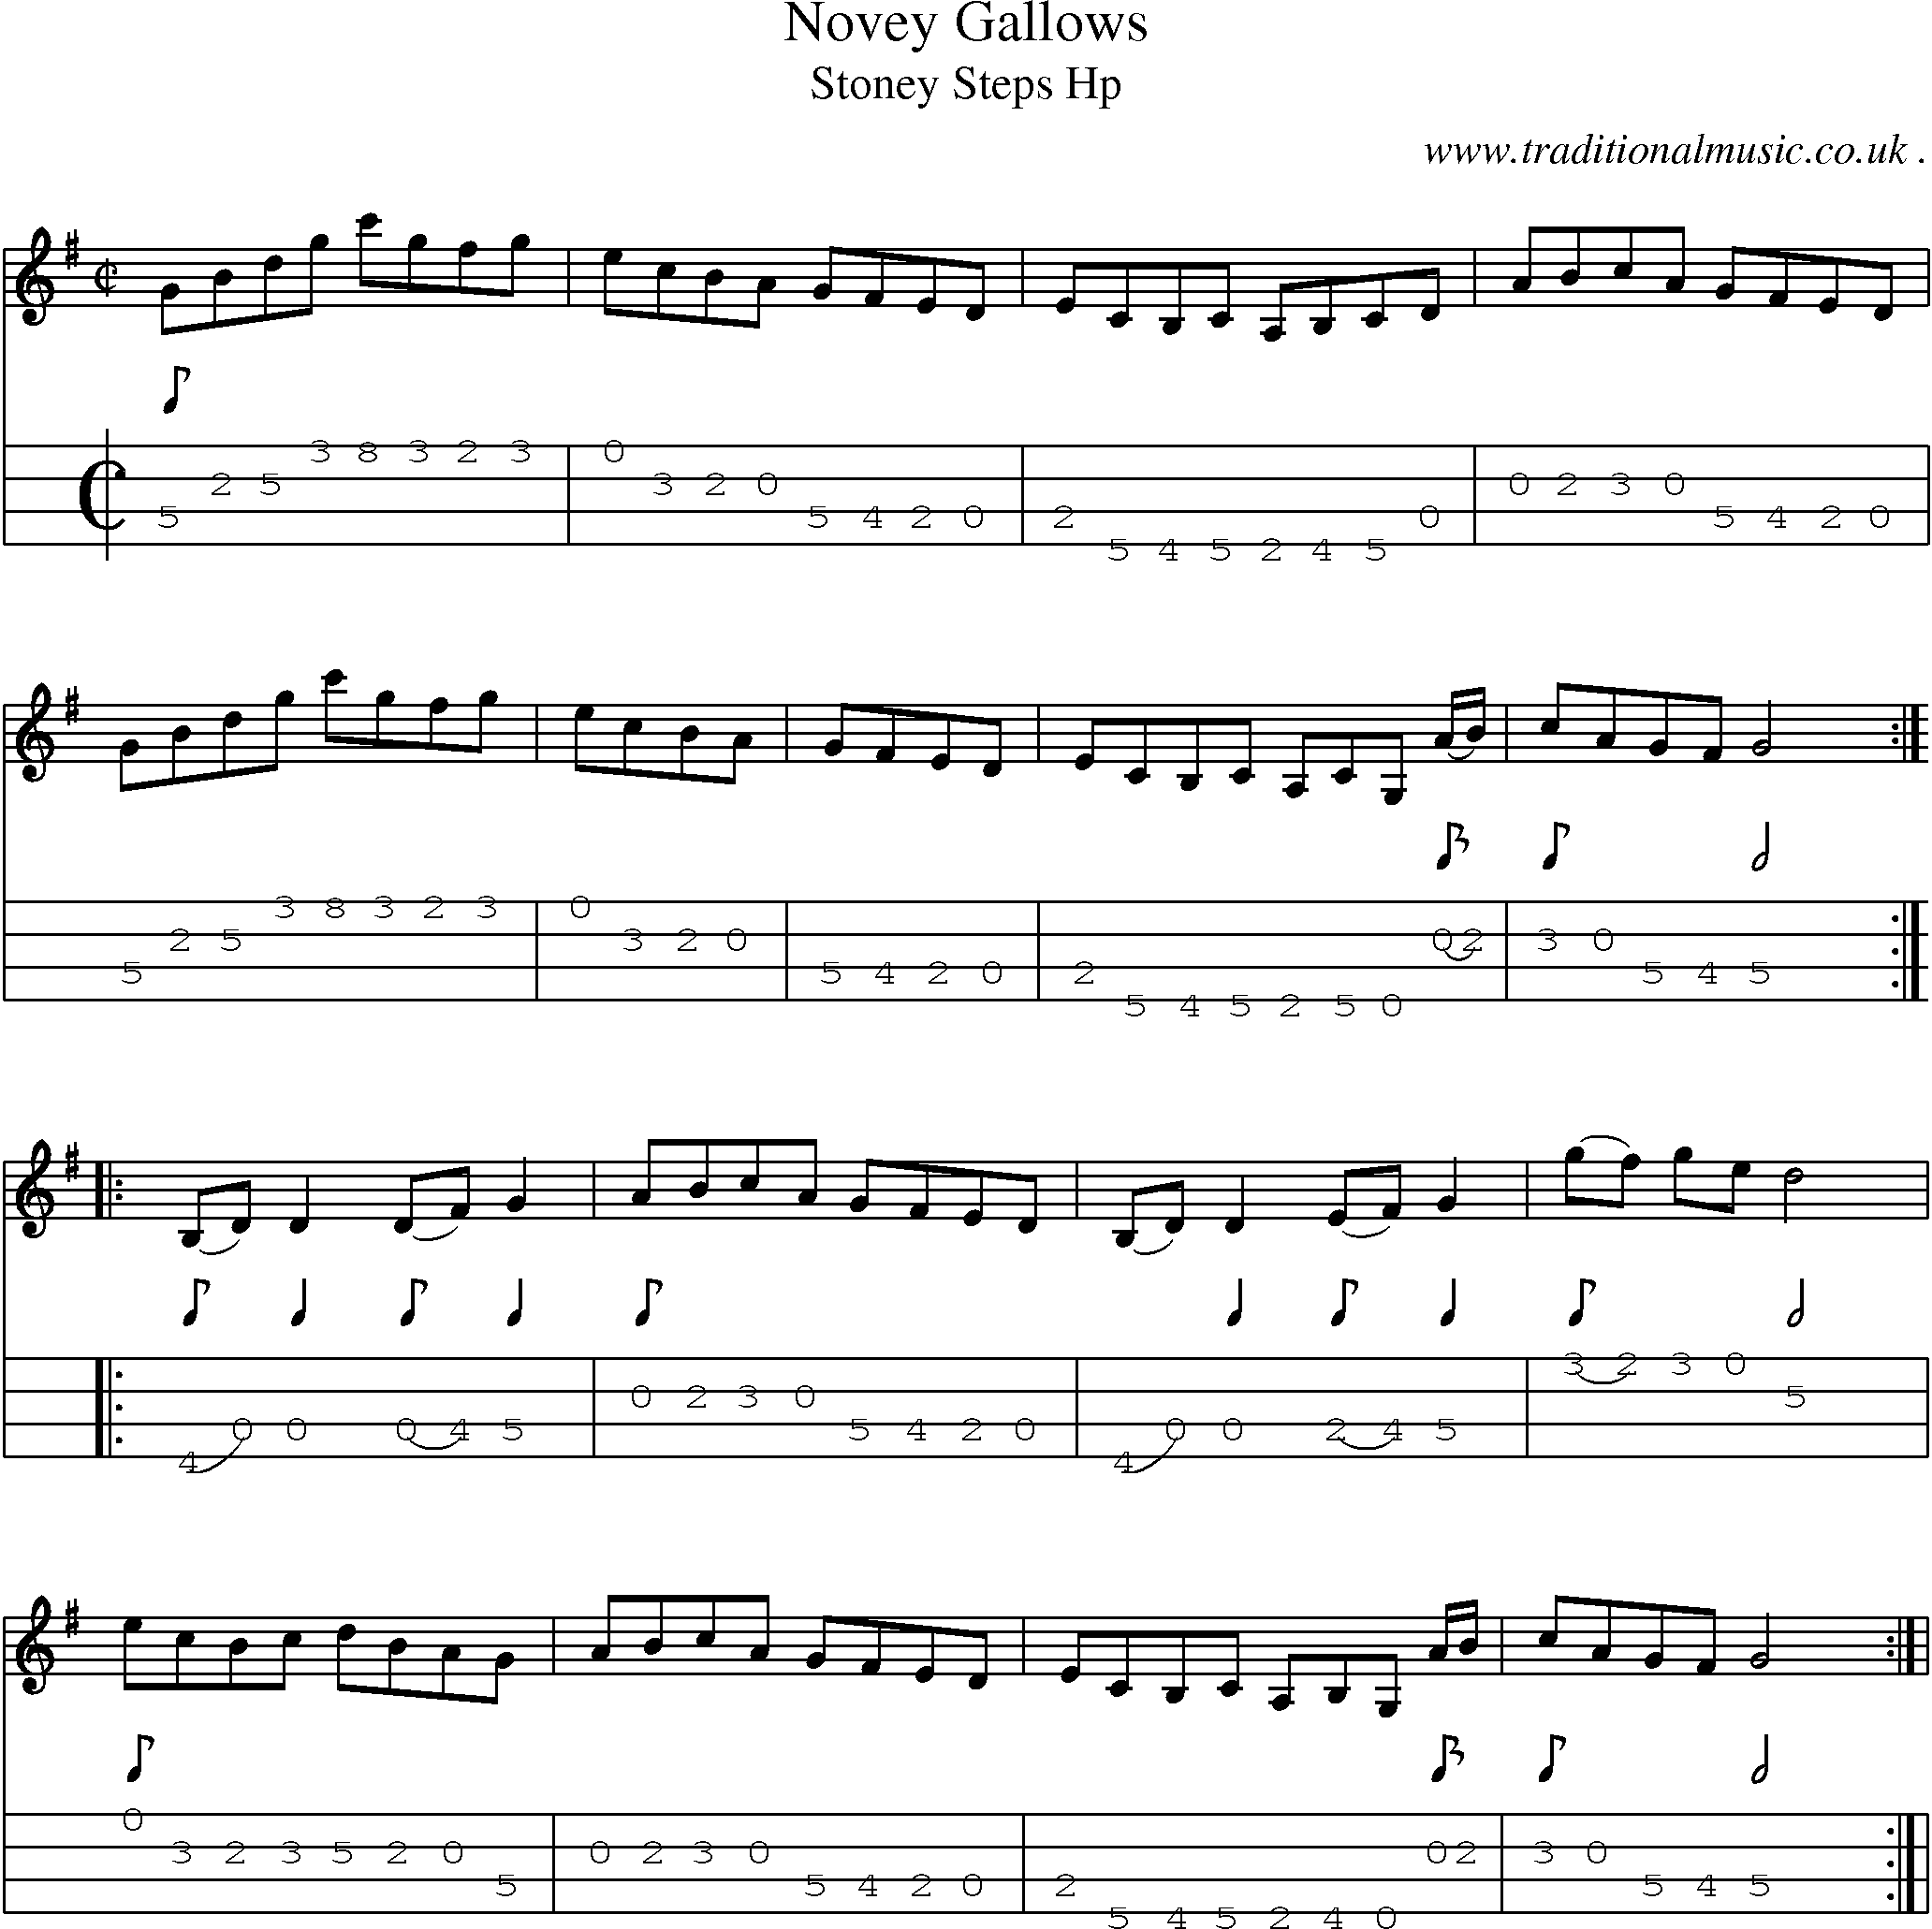 Sheet-Music and Mandolin Tabs for Novey Gallows